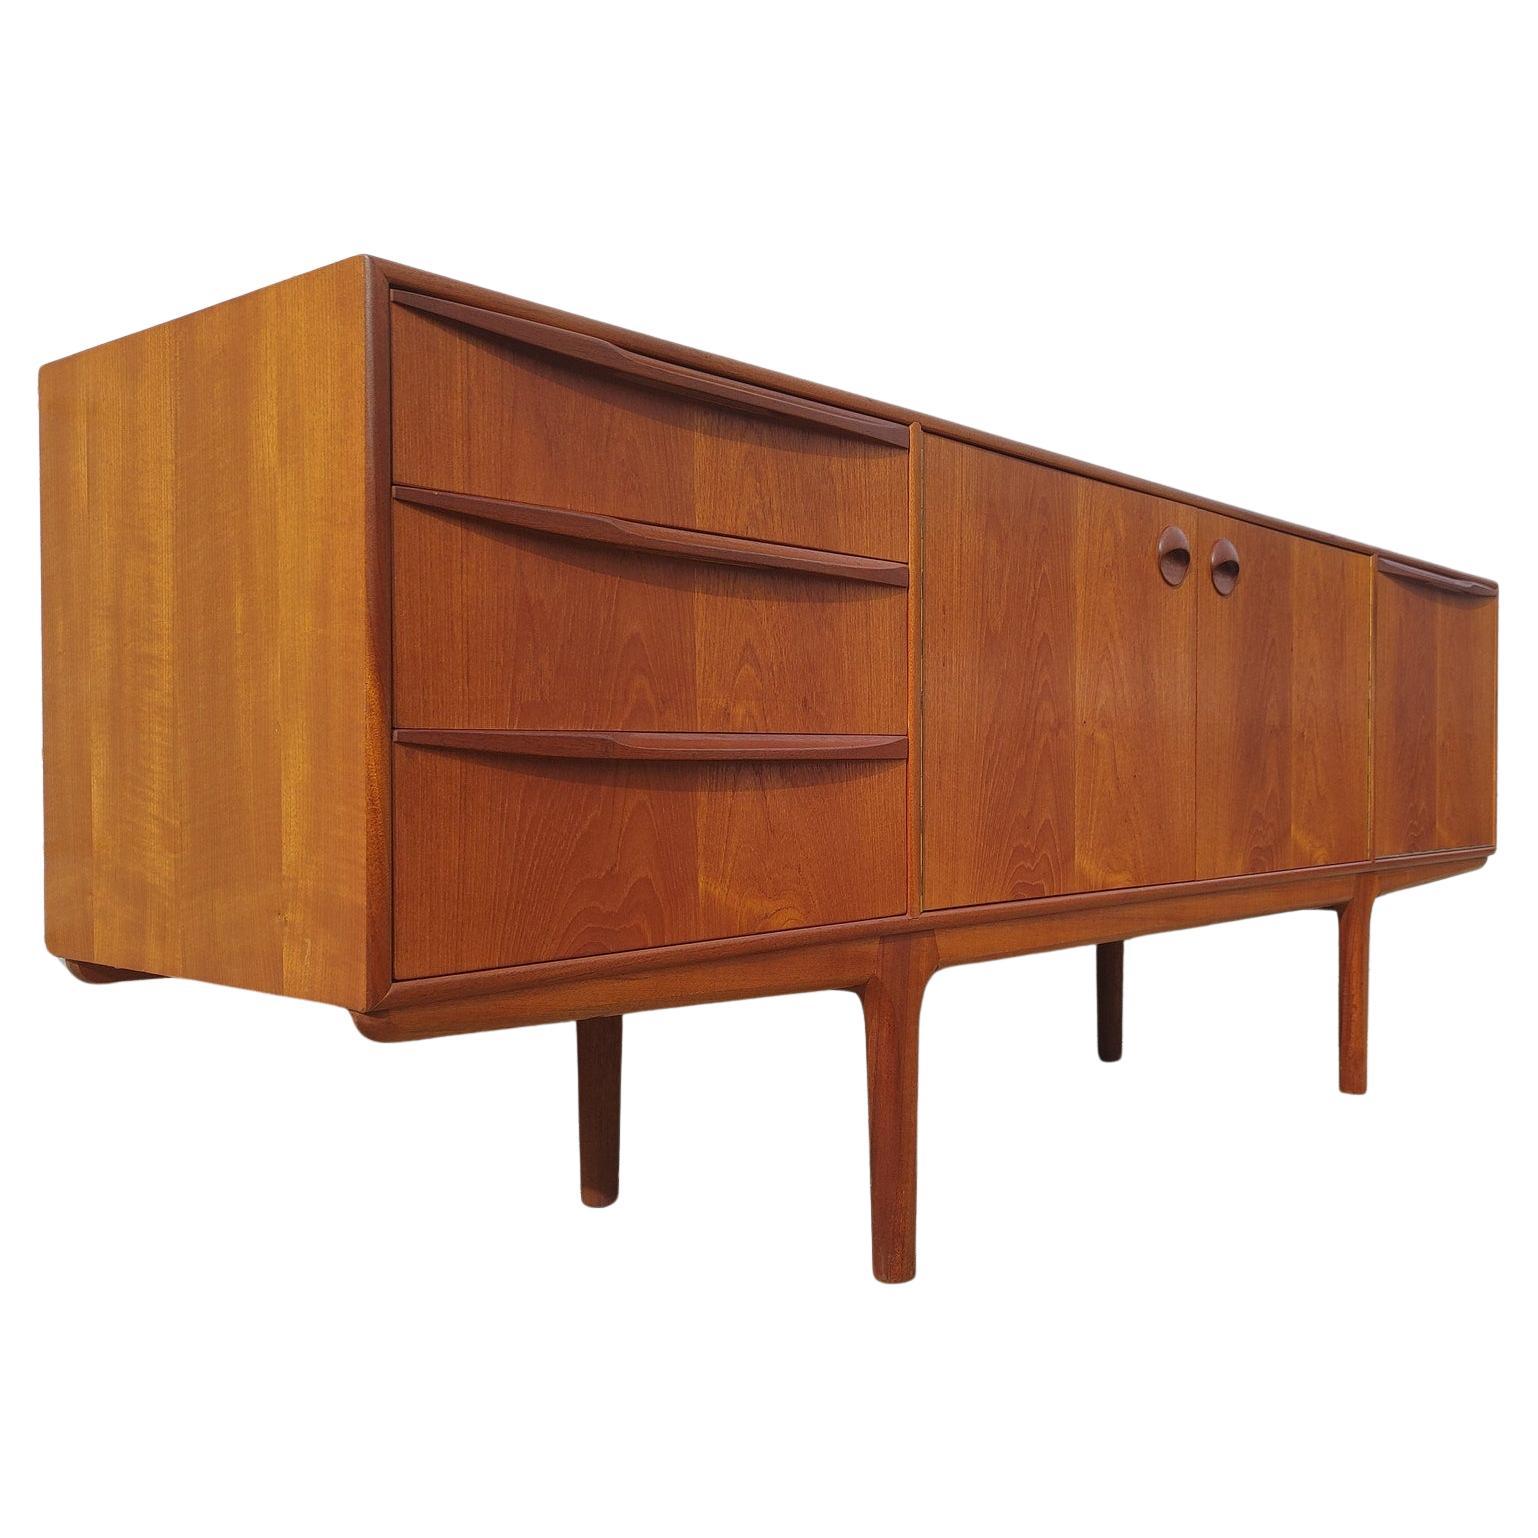 Mid Century Modern Teak Sideboard by McIntosh

Above average vintage condition and structurally sound. Has some expected slight finish wear and scratching. Front edge has a ding and front top has some small discoloration visible in listing pictures.